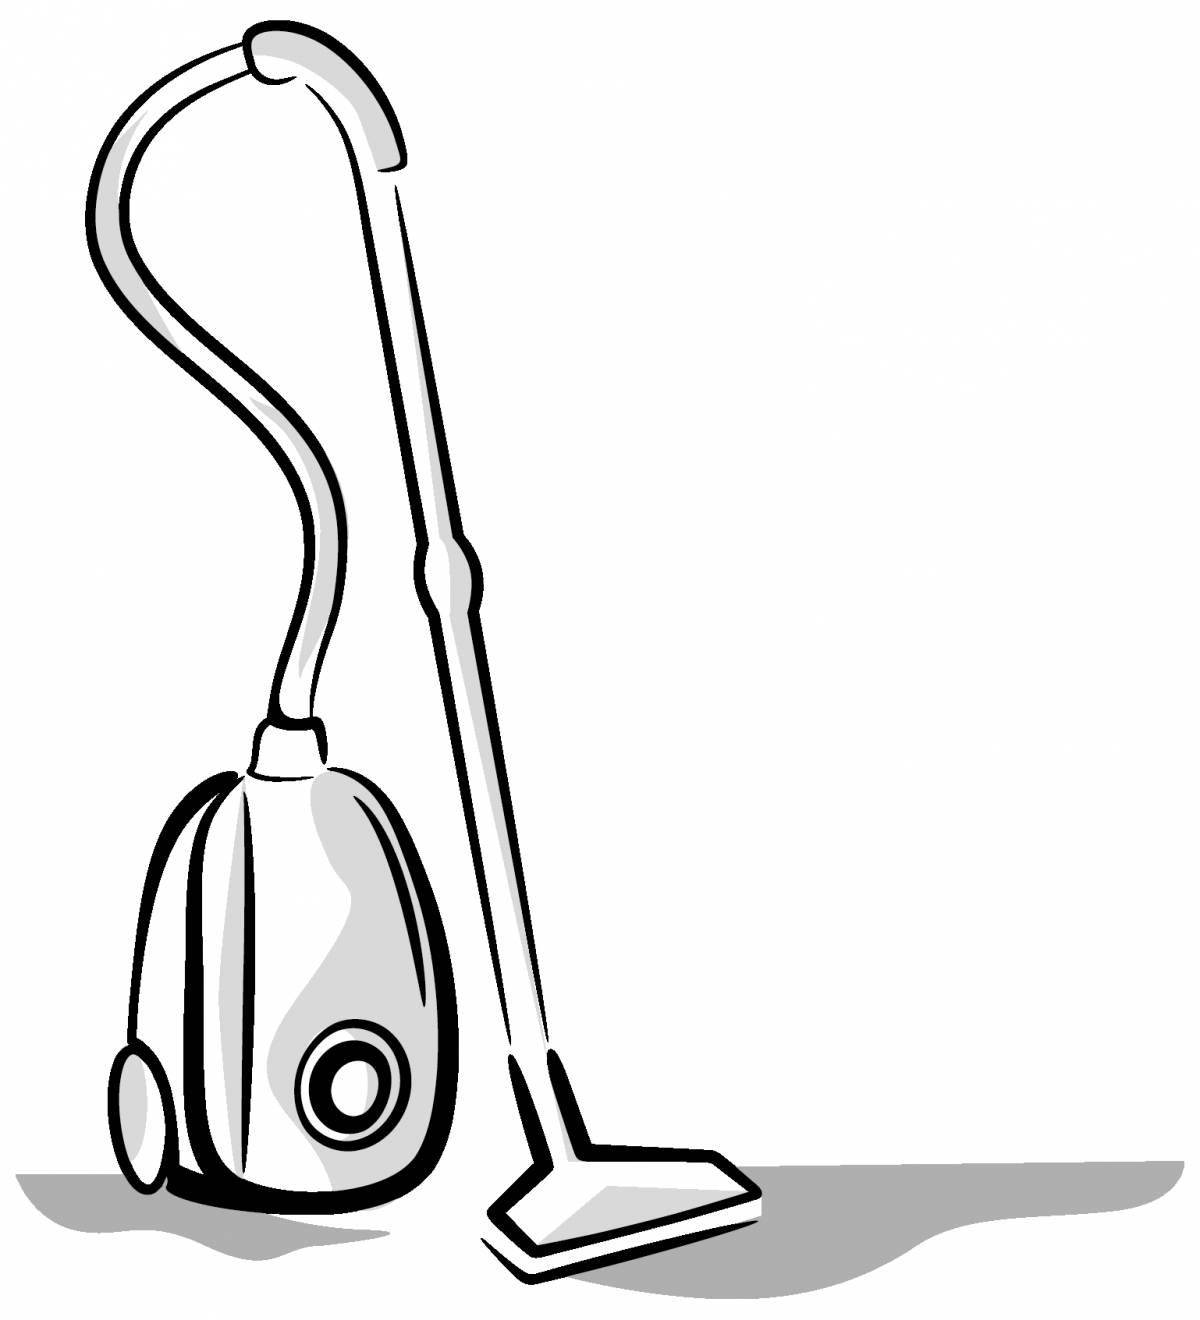 Attractive coloring of the vacuum cleaner for the little ones